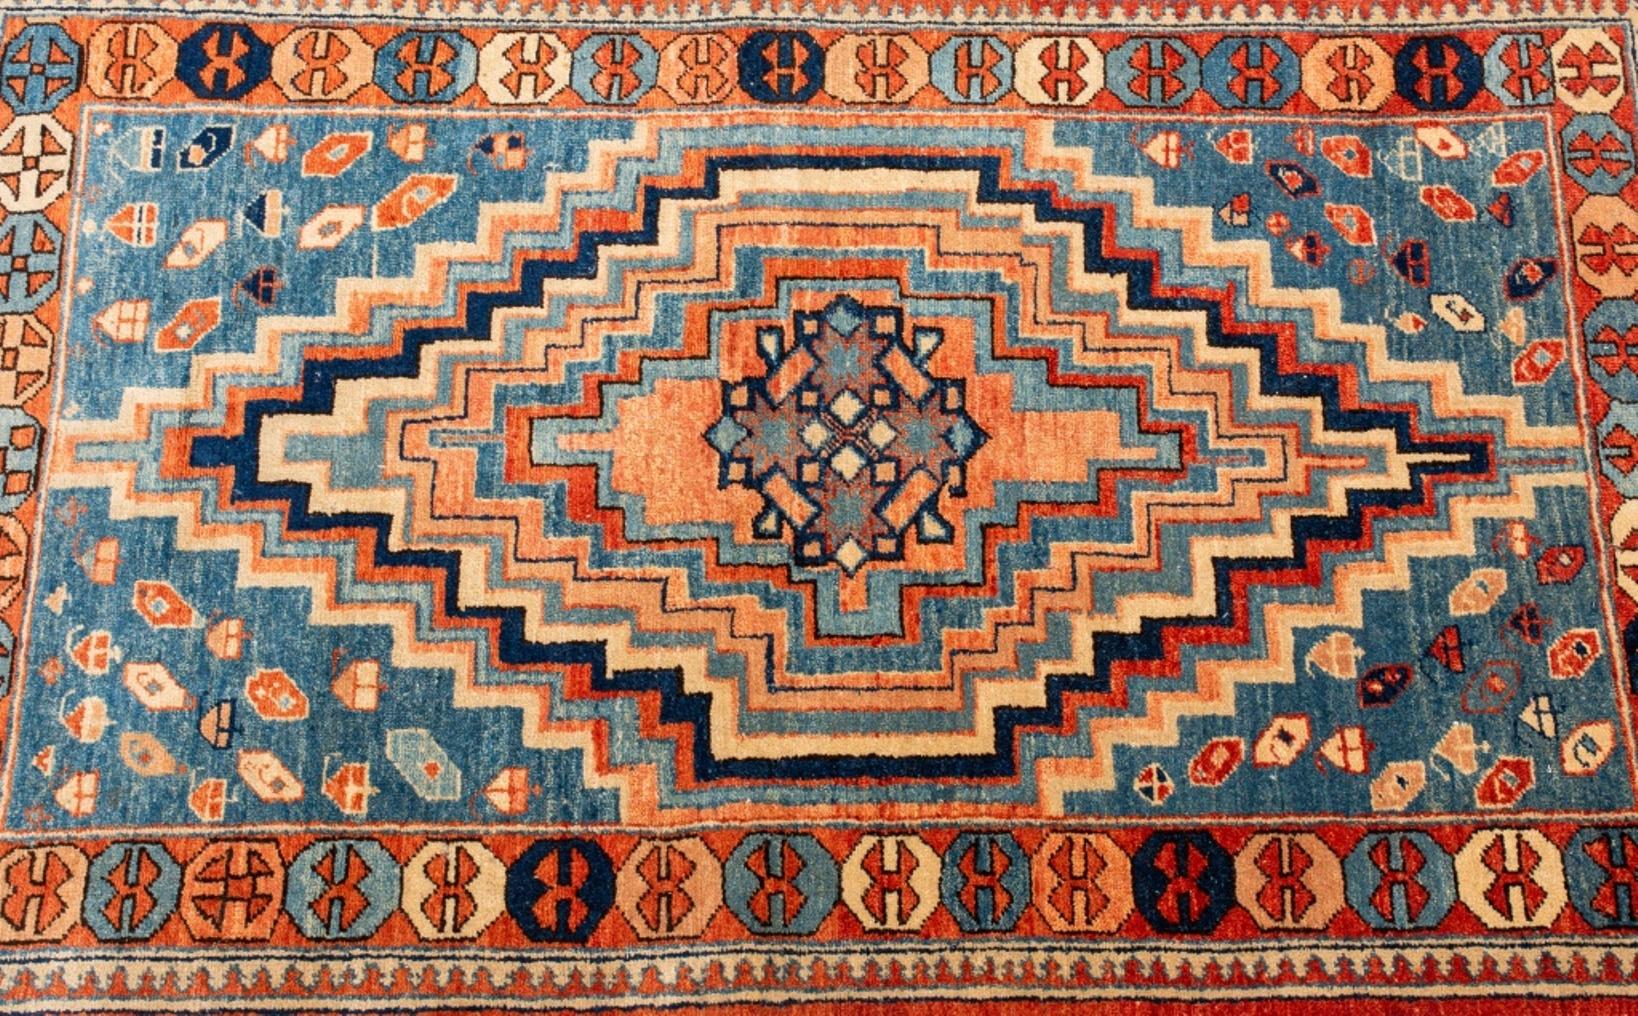 Turkish handknotted rug, depicting an abrash geometric pattern, made by Rubin Carpets, made in Turkey.

Dimensions: 4' 10